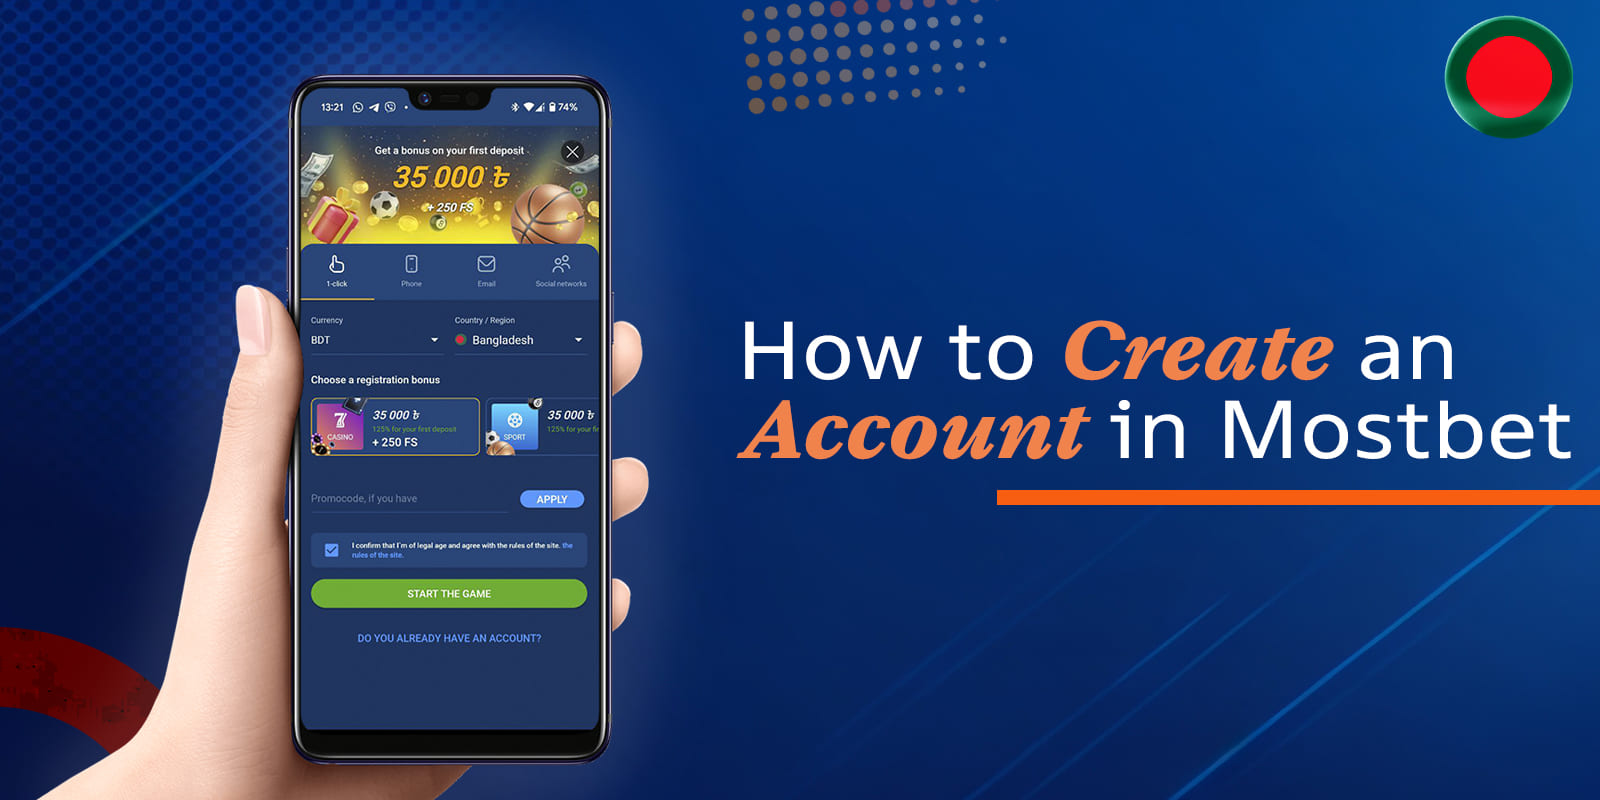 Create an account in Mostbet